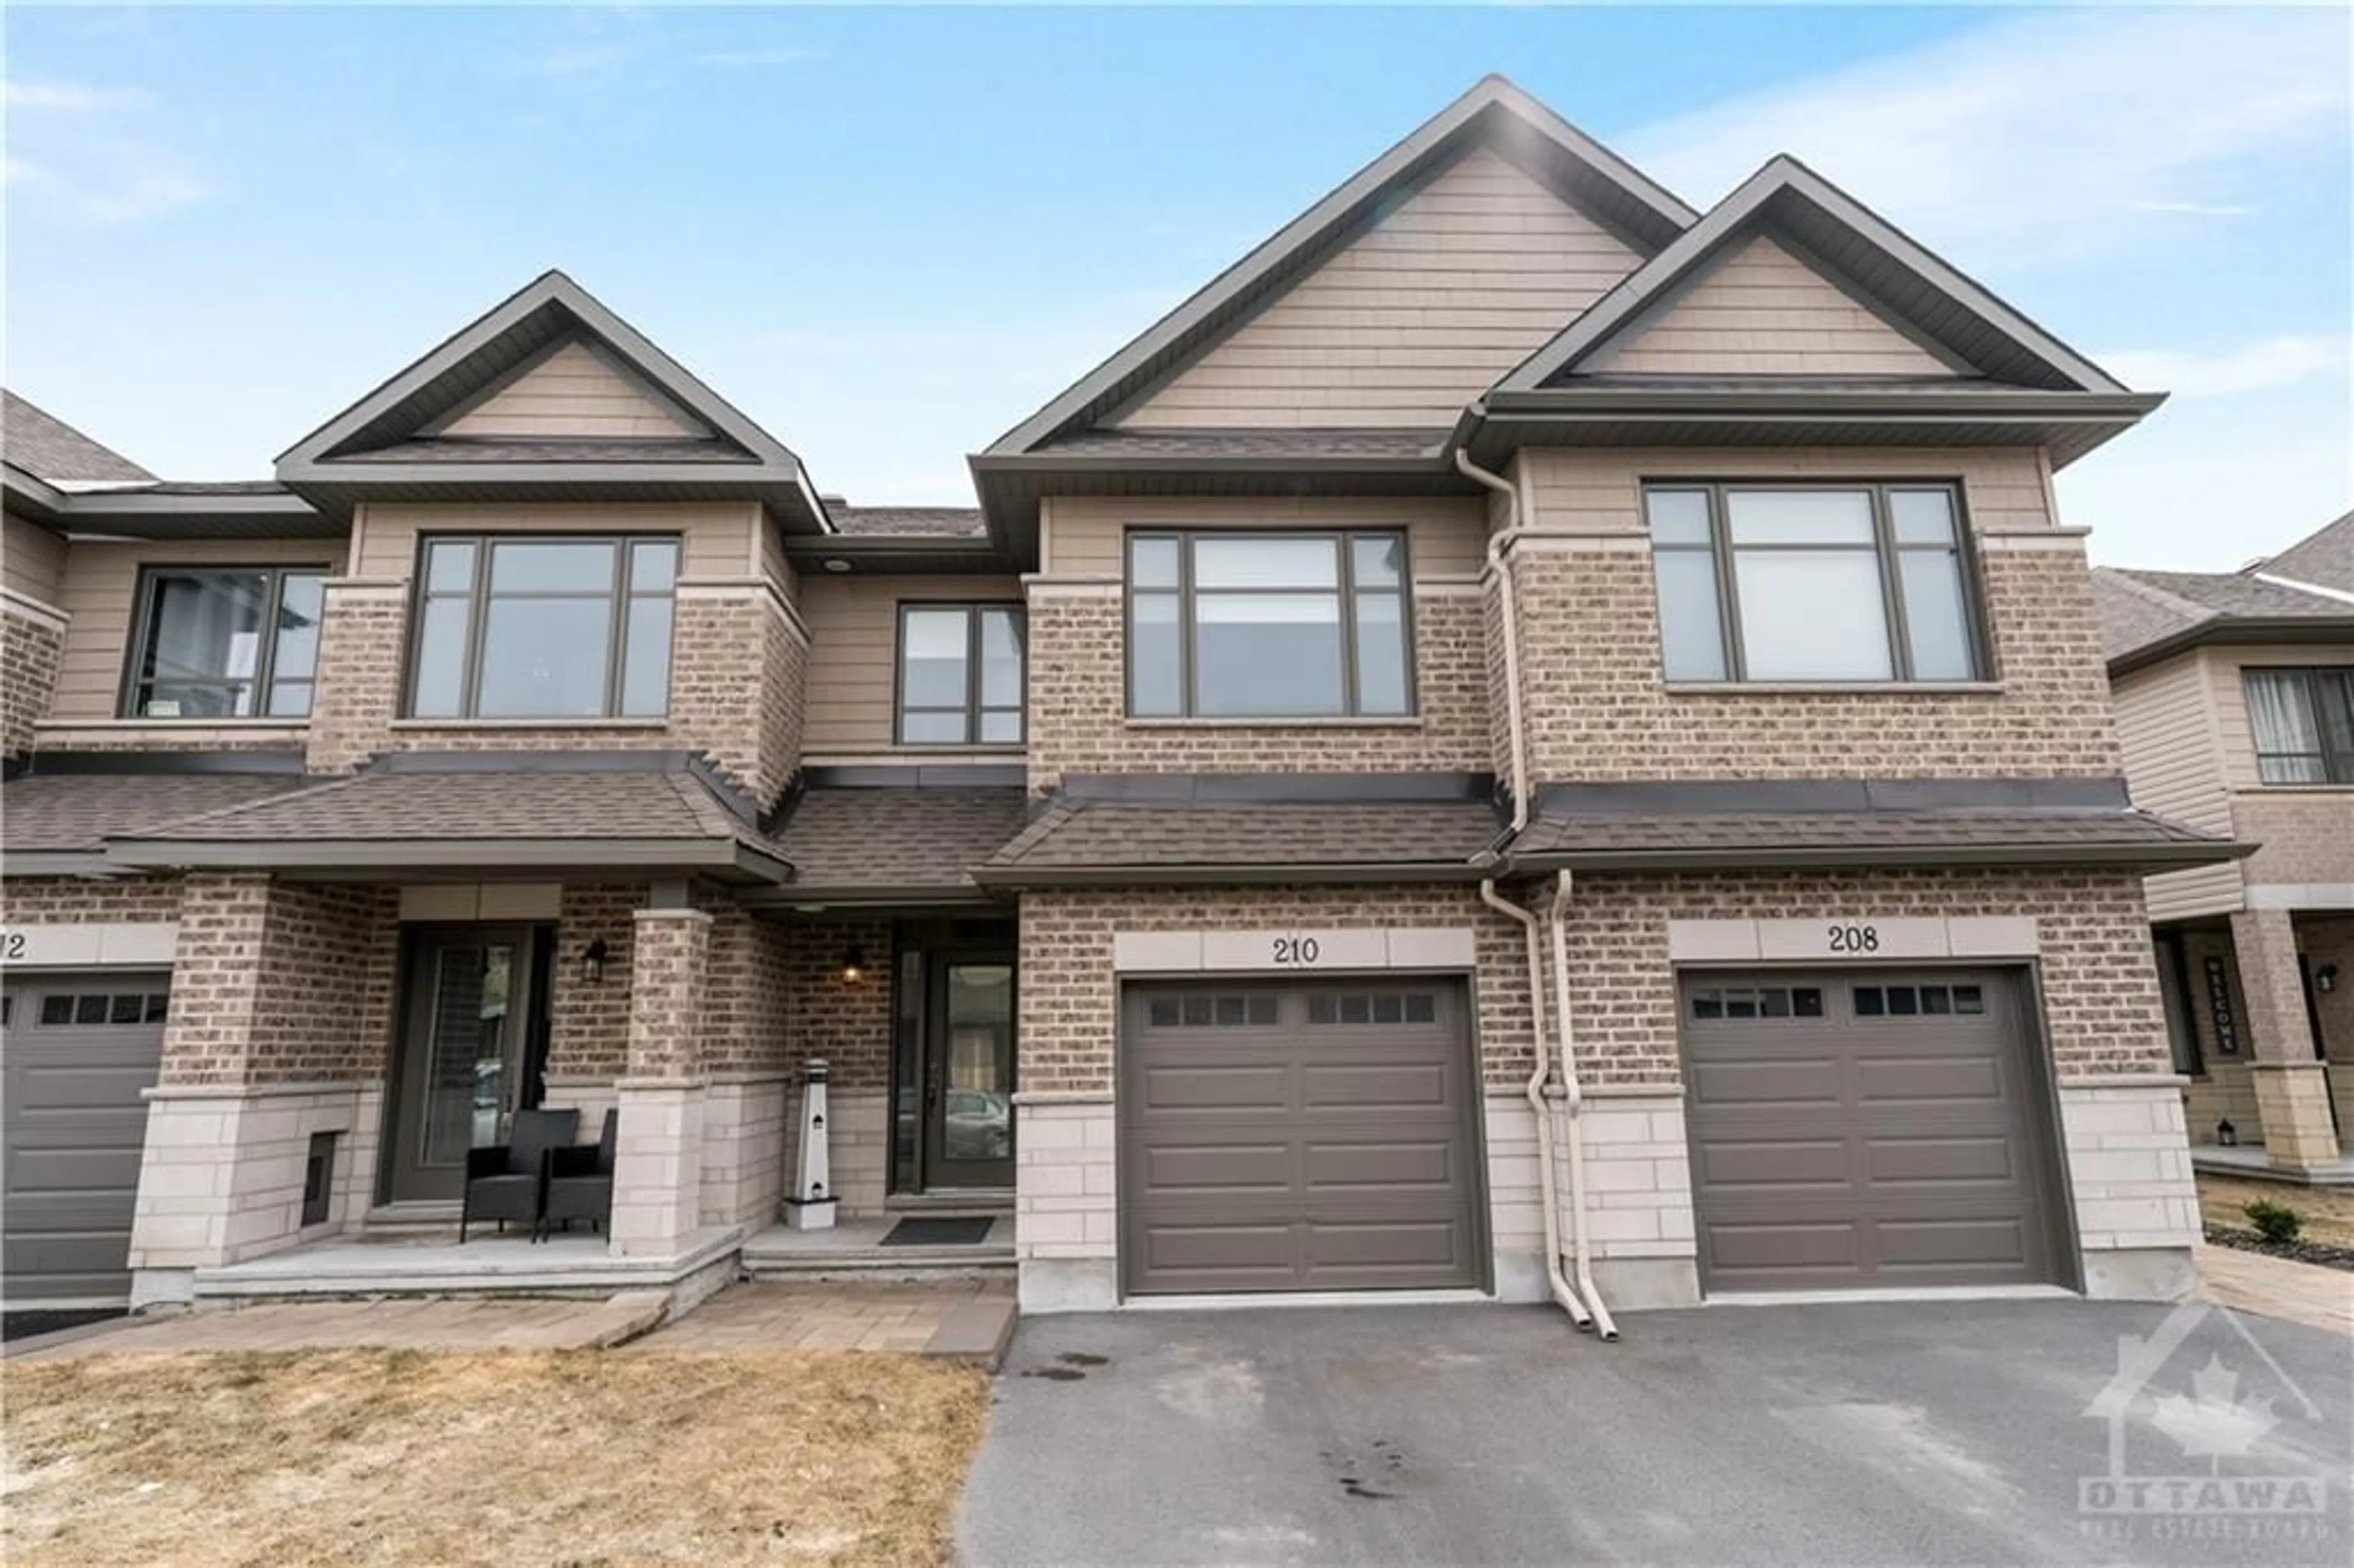 Home with brick exterior material for 210 PURCHASE Cres, Ottawa Ontario K2S 1P8